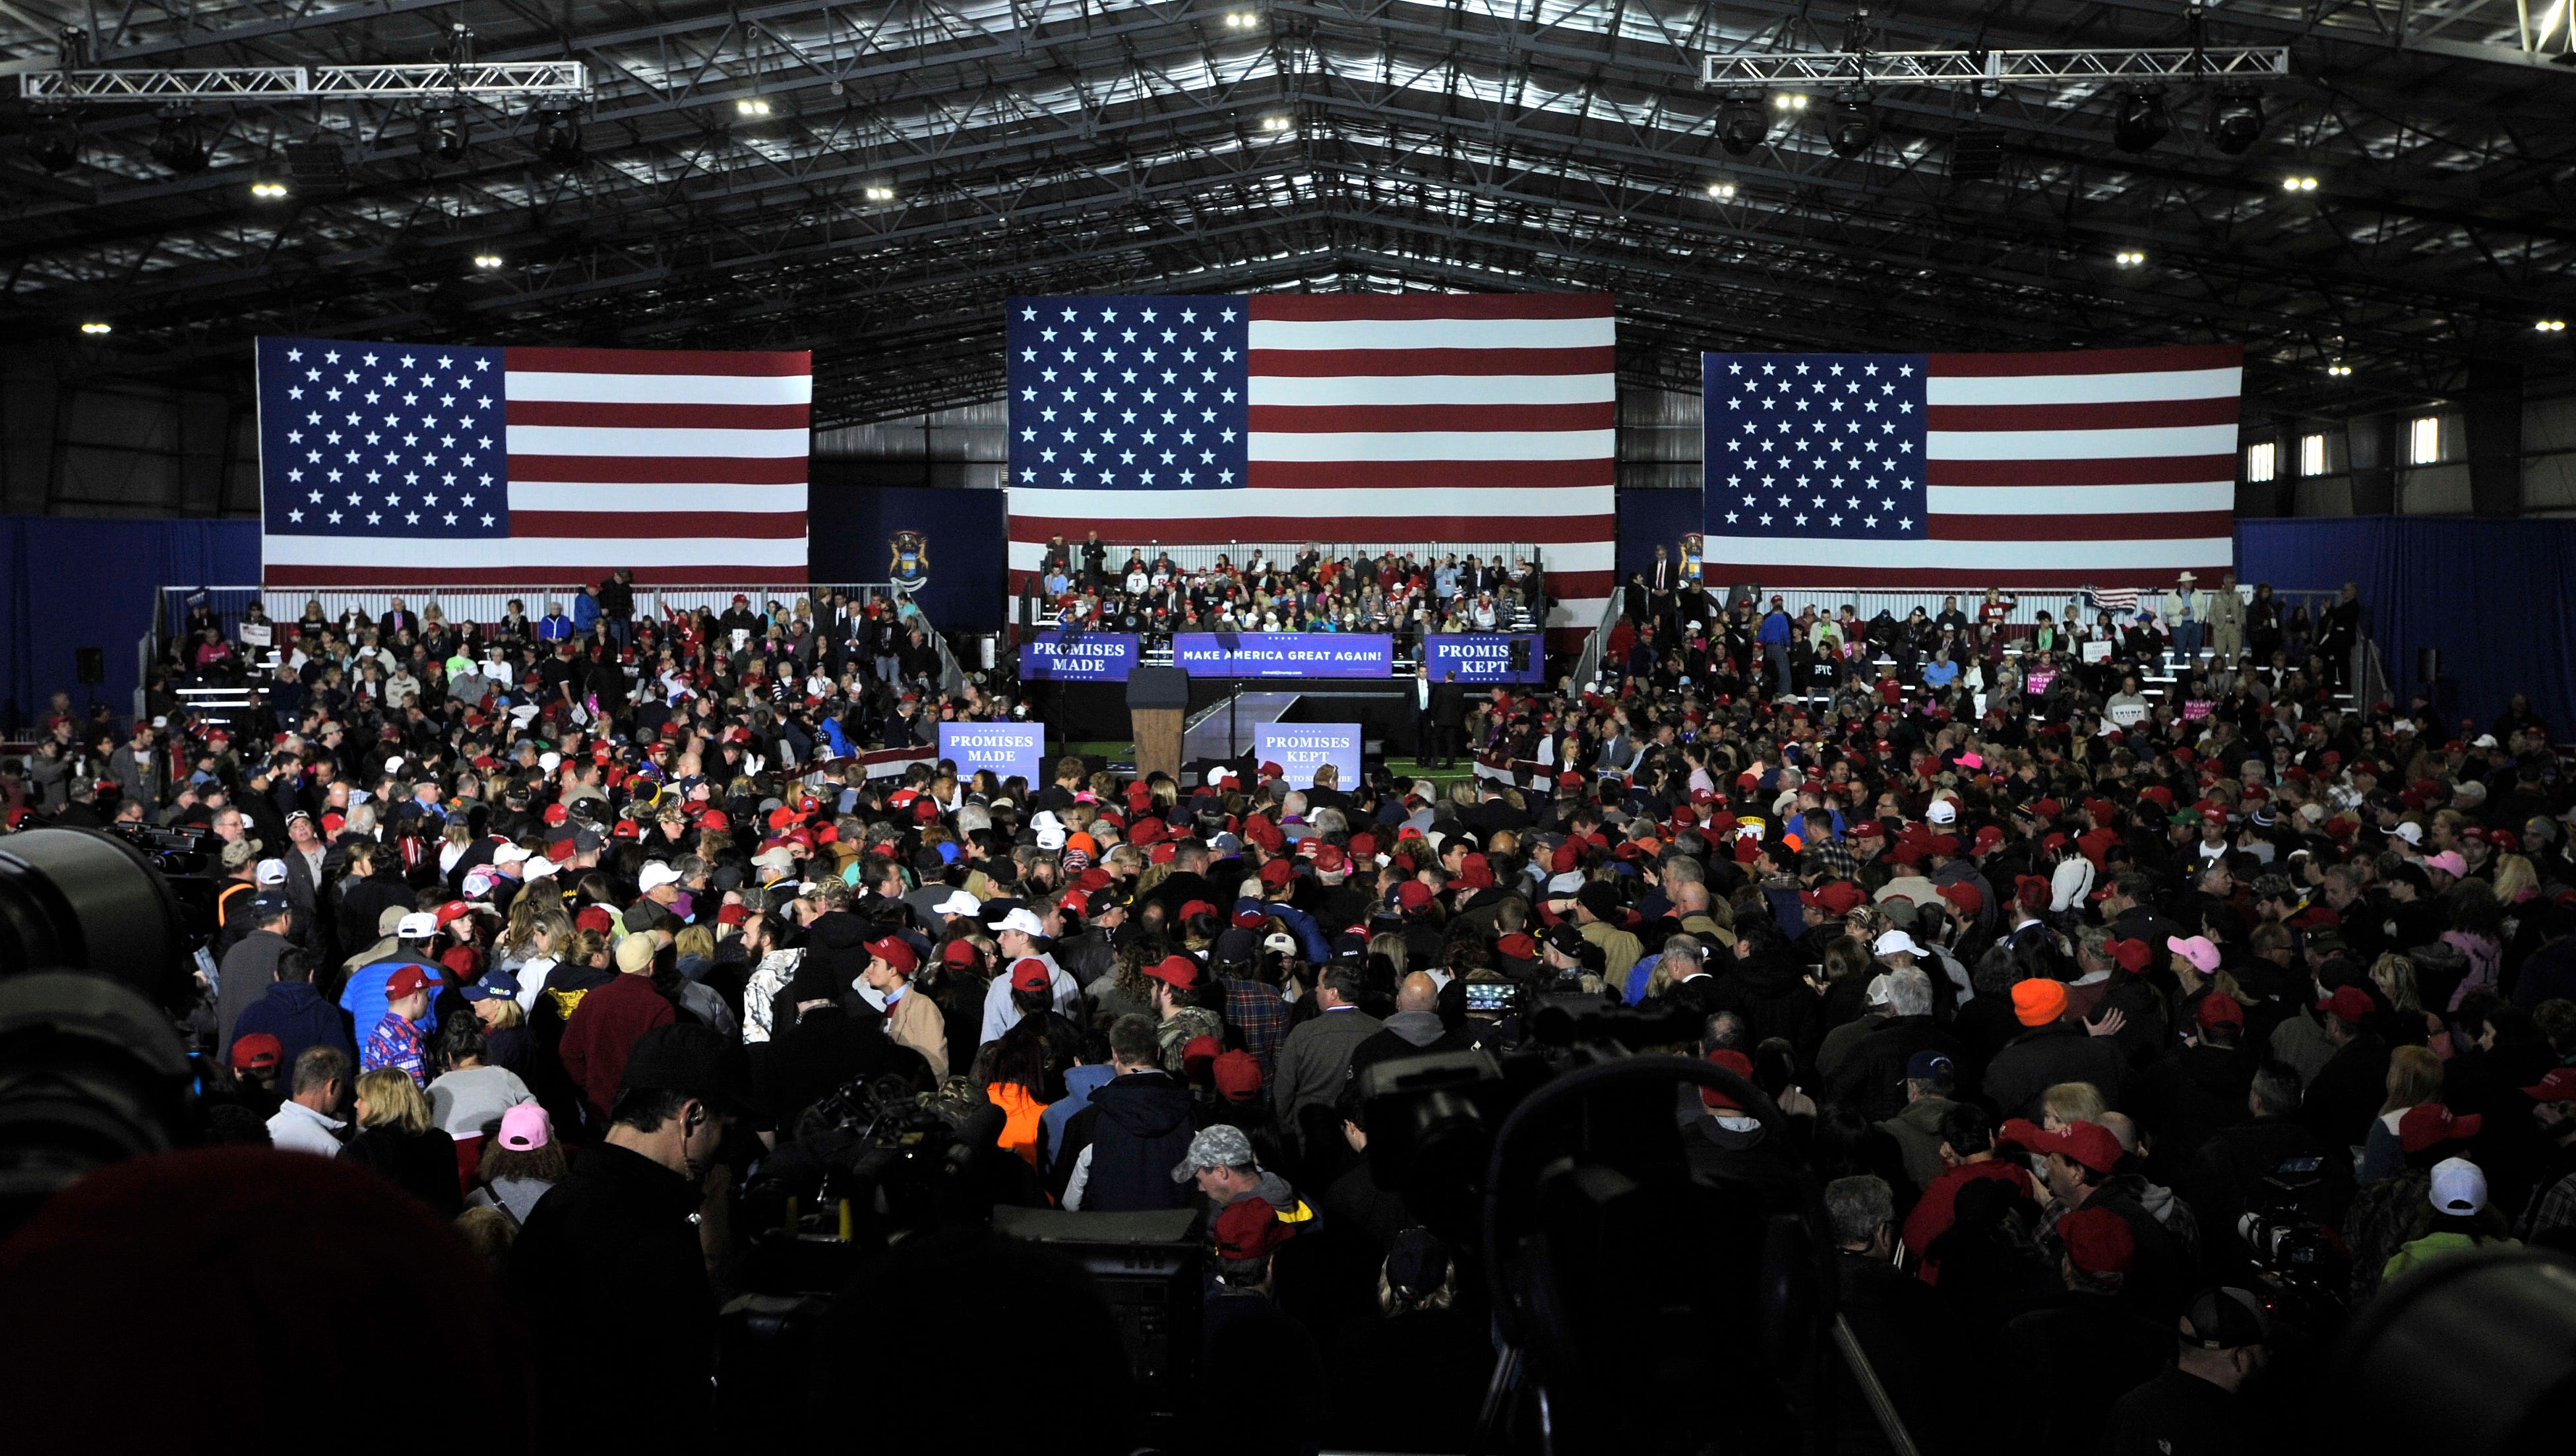 Three huge U.S. flags are the back drop for the president's speech as a capacity crowd fills the Total Sports Park complex in Washington Twp.